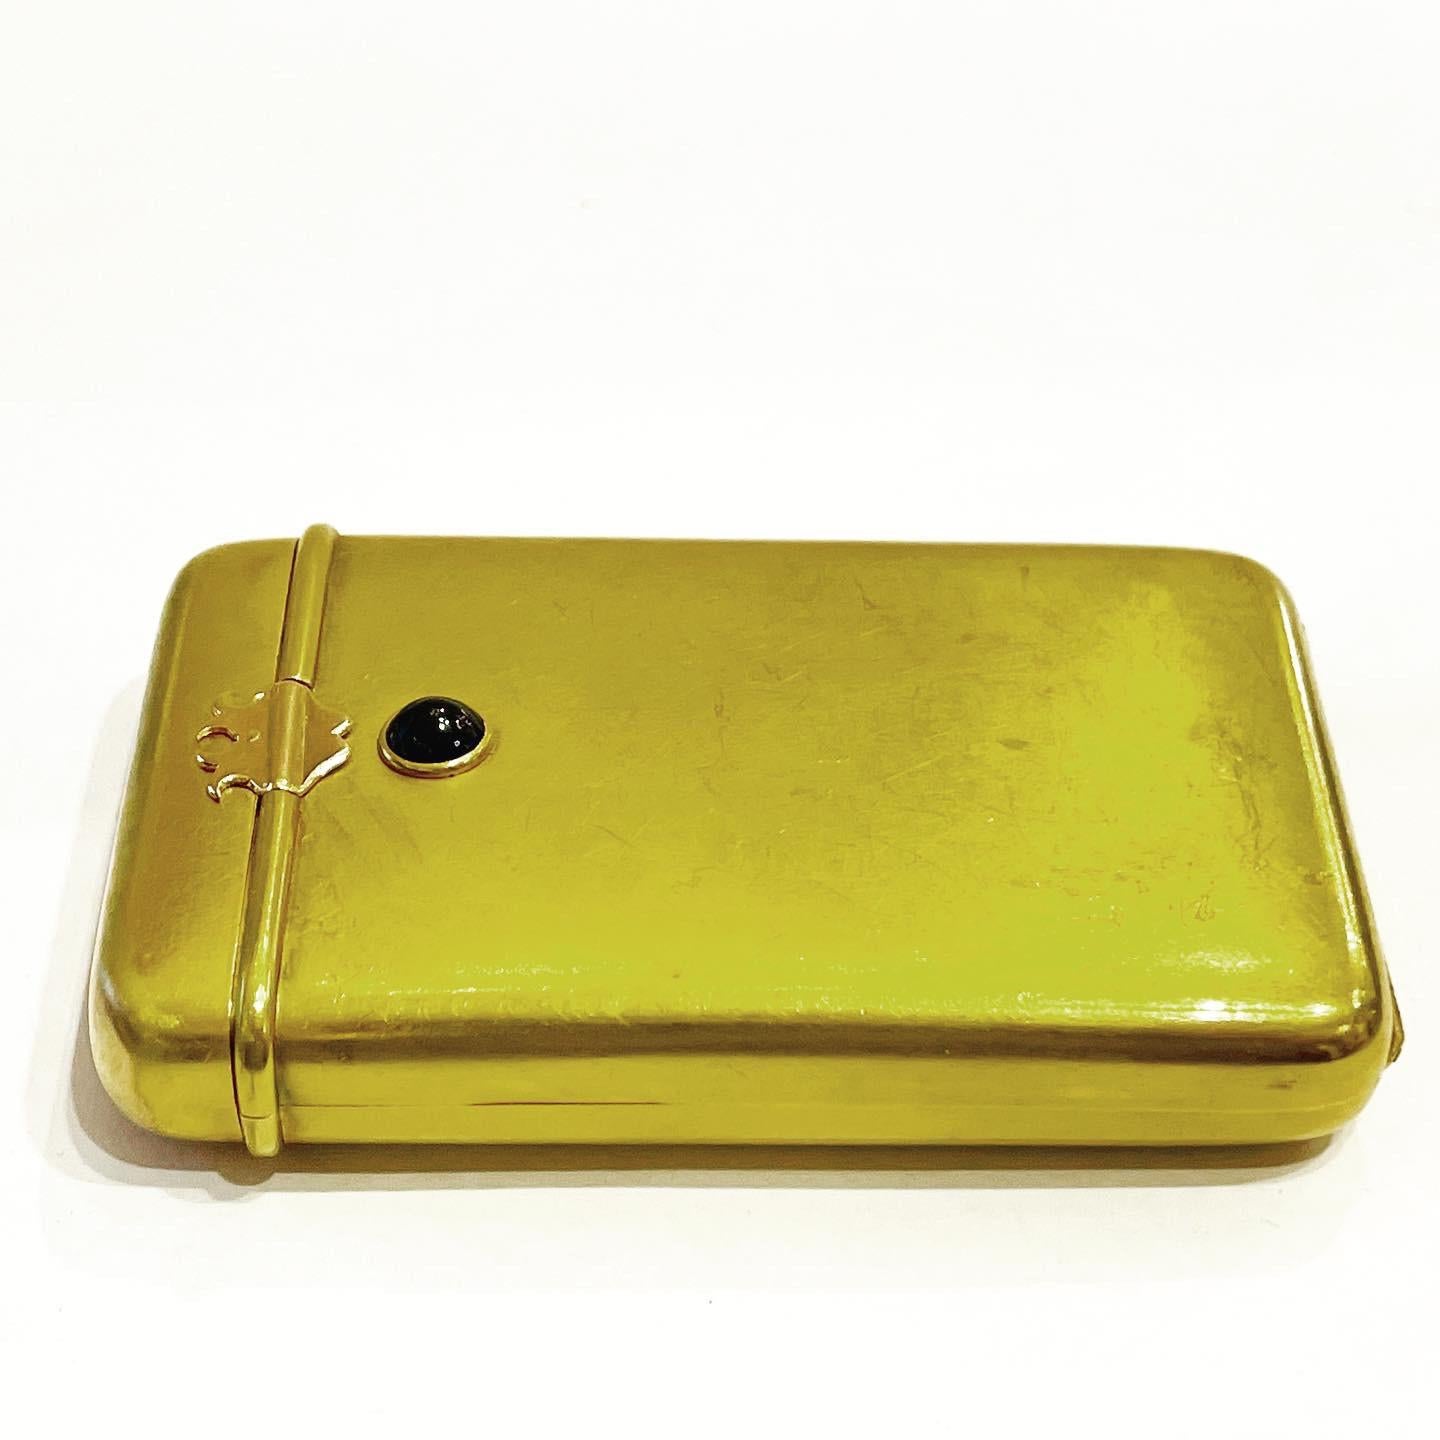 Impressive, in original condition, with original toning, 18k yellow gold cigarette case. 
Attractive textured gold design with a deep blue cabochon sapphire button clasp. 
Weight: almost 100 grams 18k gold (98.62gr).
Measuring 9 cm long by 5.5 cm